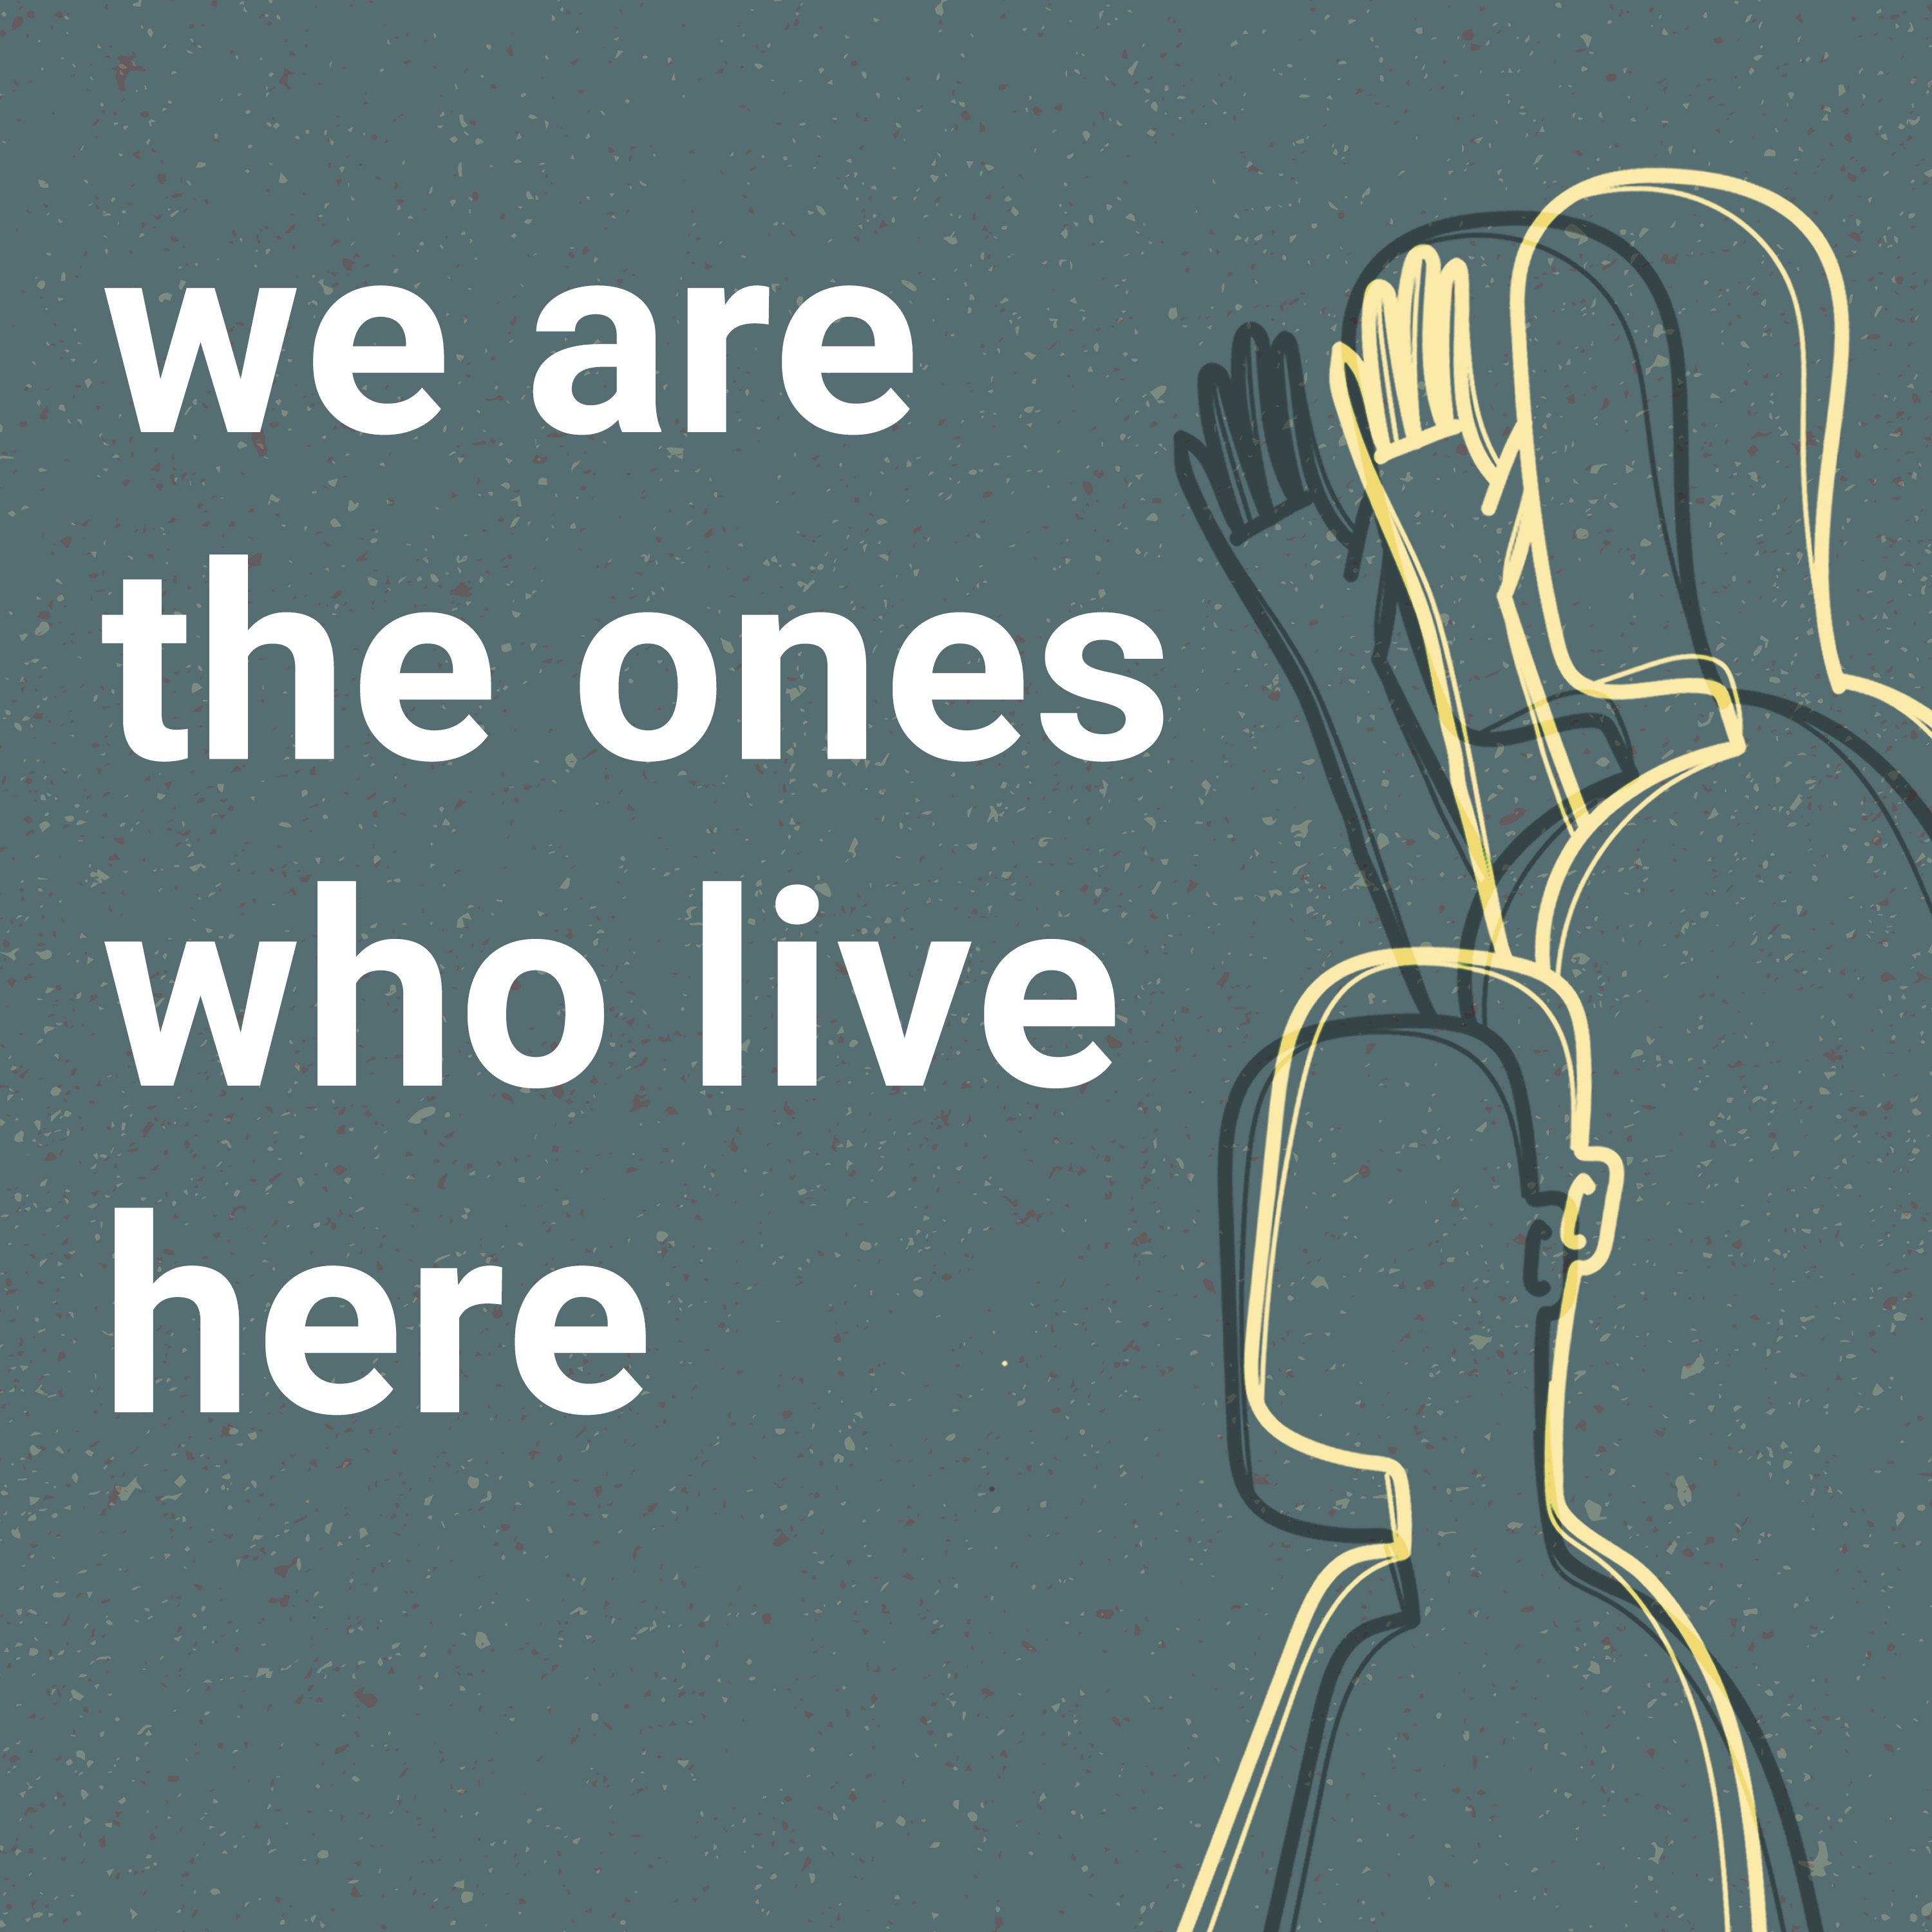 We Are the Ones Who Live Here